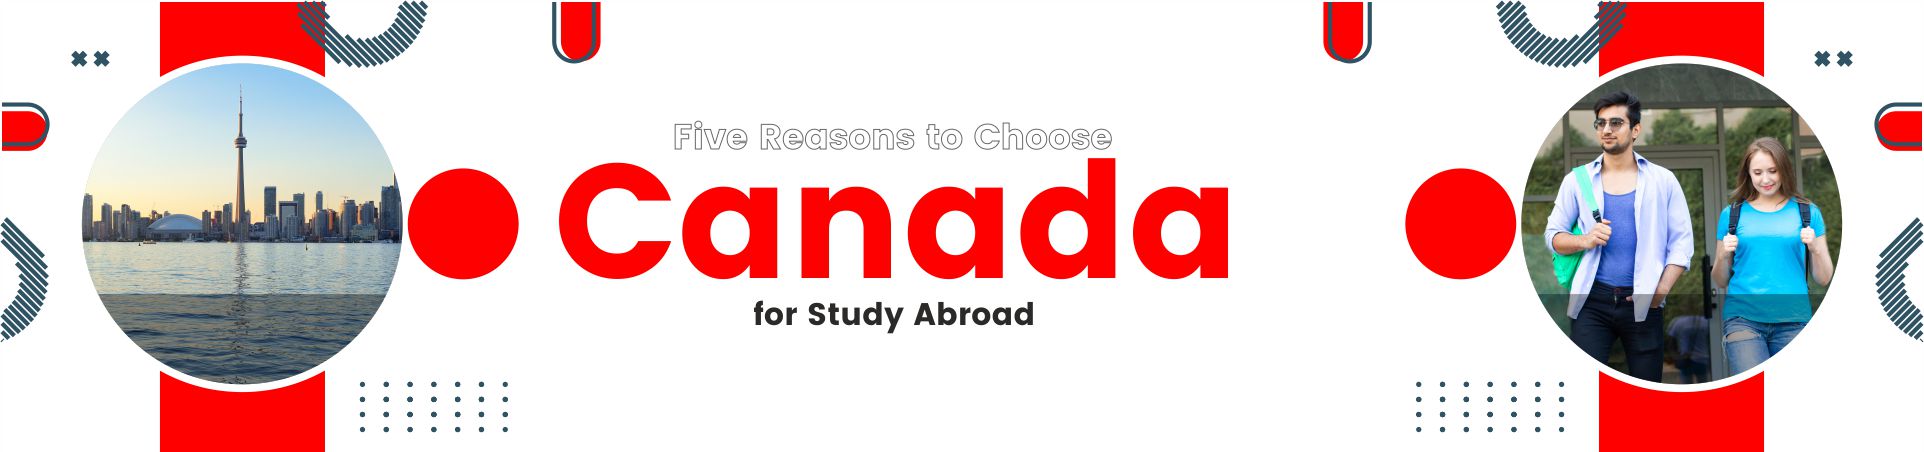 Five Reasons to Choose Canada for Study Abroad